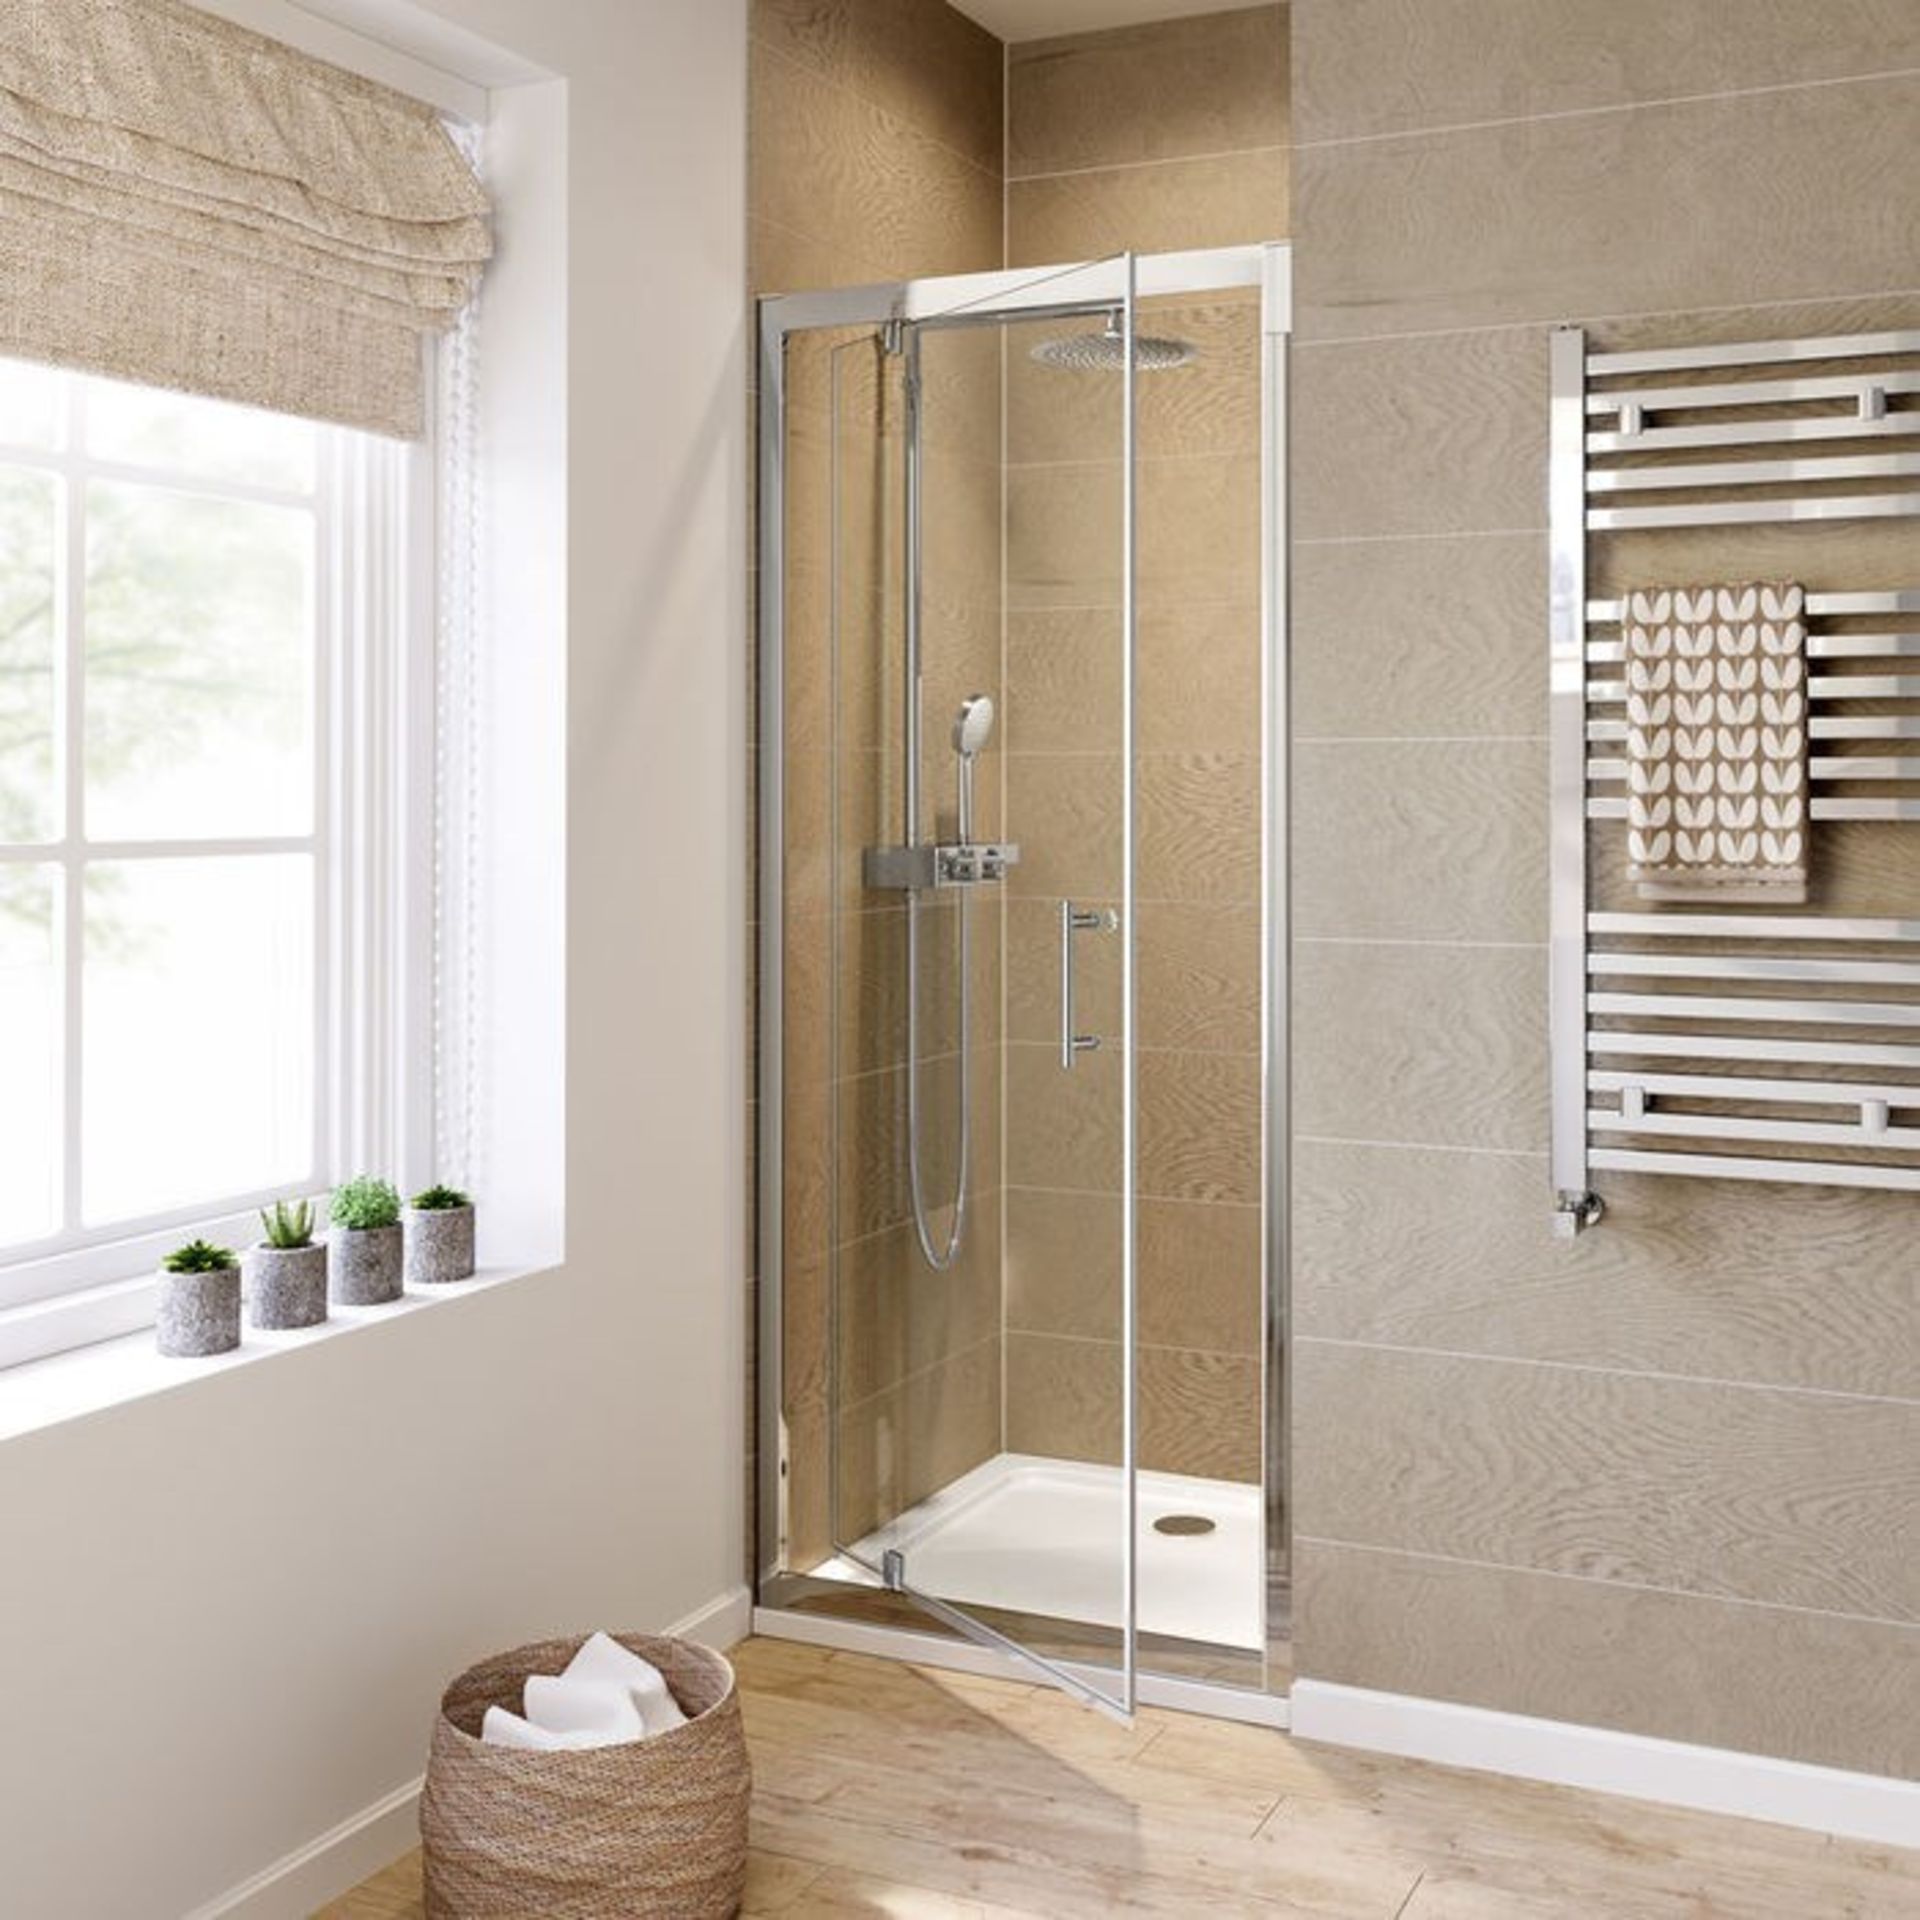 Brand New Twyfords 700mm - 6mm - Premium Pivot Shower Door. RRP £299.99.8mm Safety Glass Fully wate. - Image 2 of 2